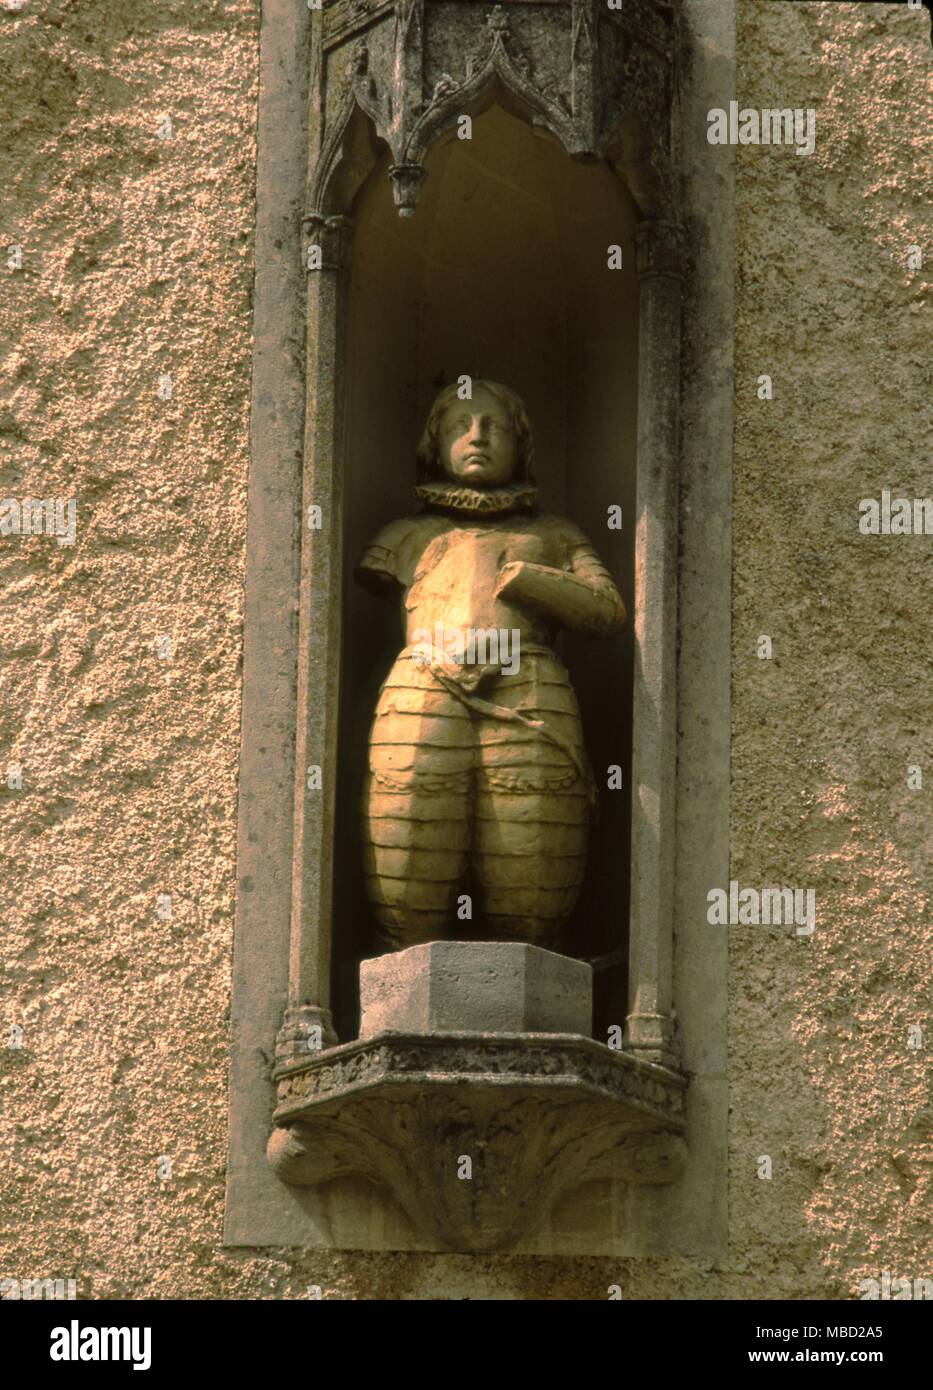 Statue of Joan of Arc. The figure is set in a niche on the front of the house at Domremy, where she is supposed to have been born. Stock Photo